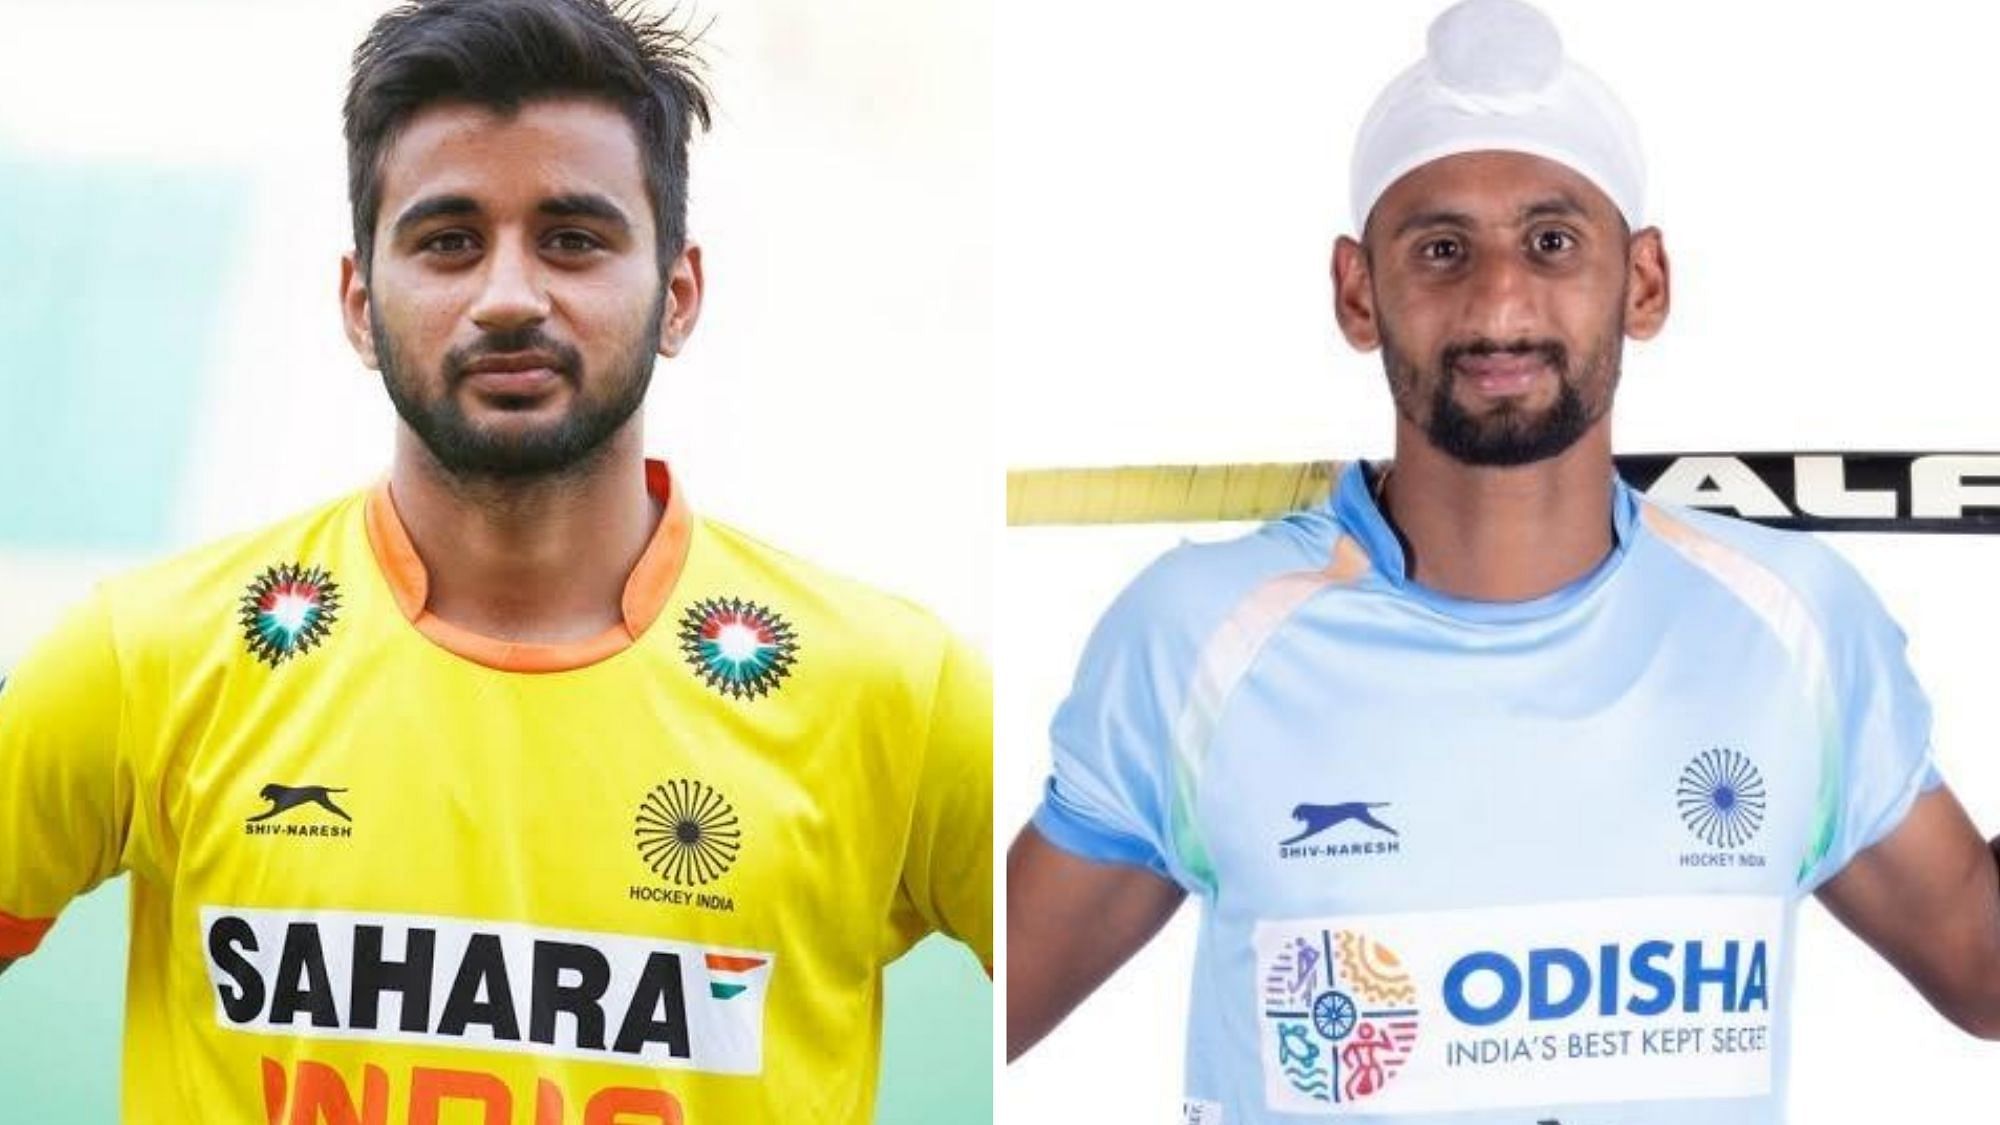 Indian hockey striker Mandeep Singh has become the latest member of the Indian men’s hockey team to test positive for coronavirus.